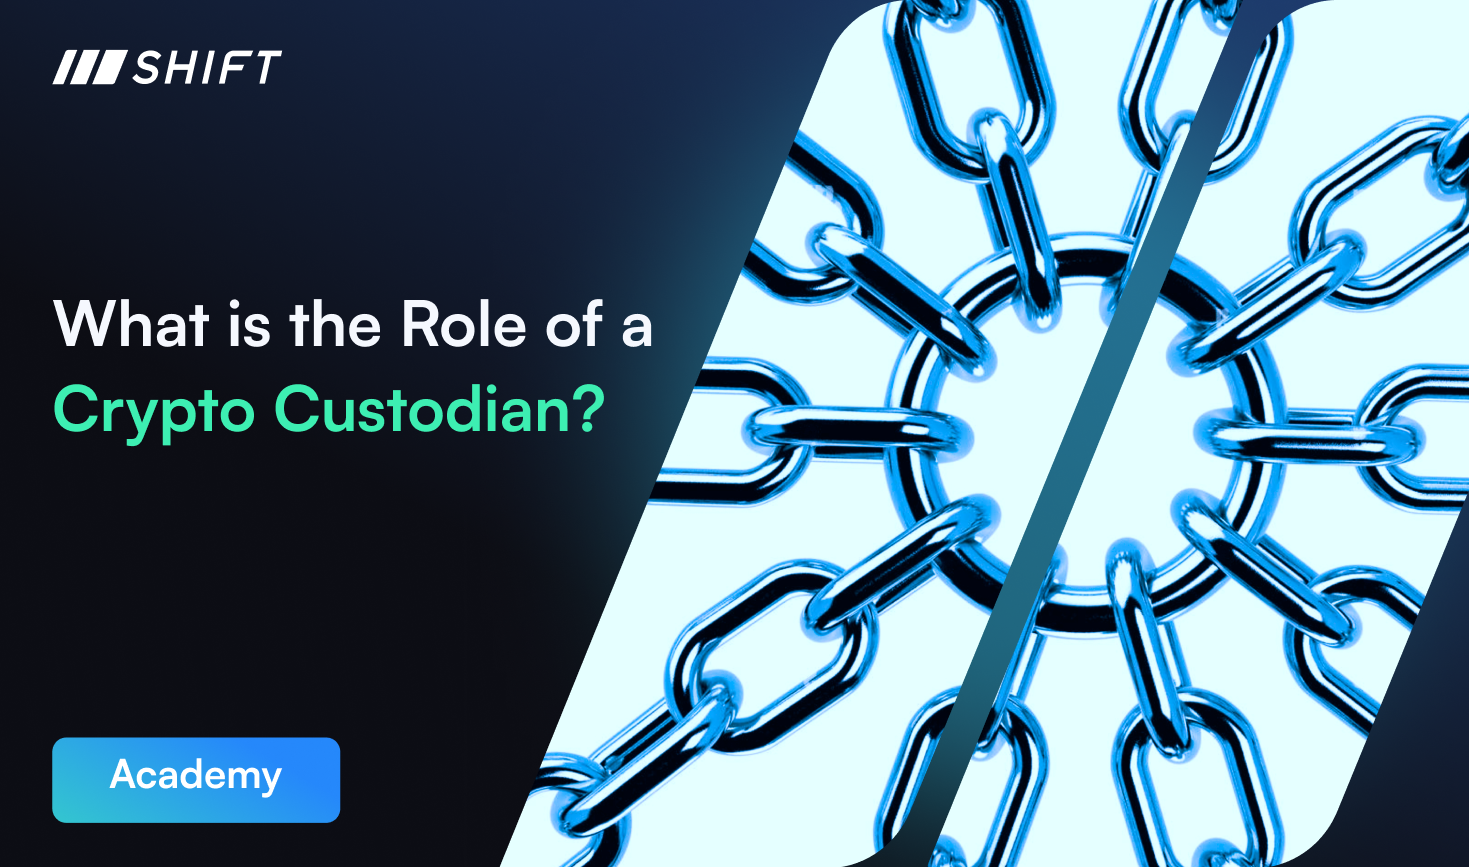 Learn all the essential details of crypto custodians and the role they fill in the digital asset world.